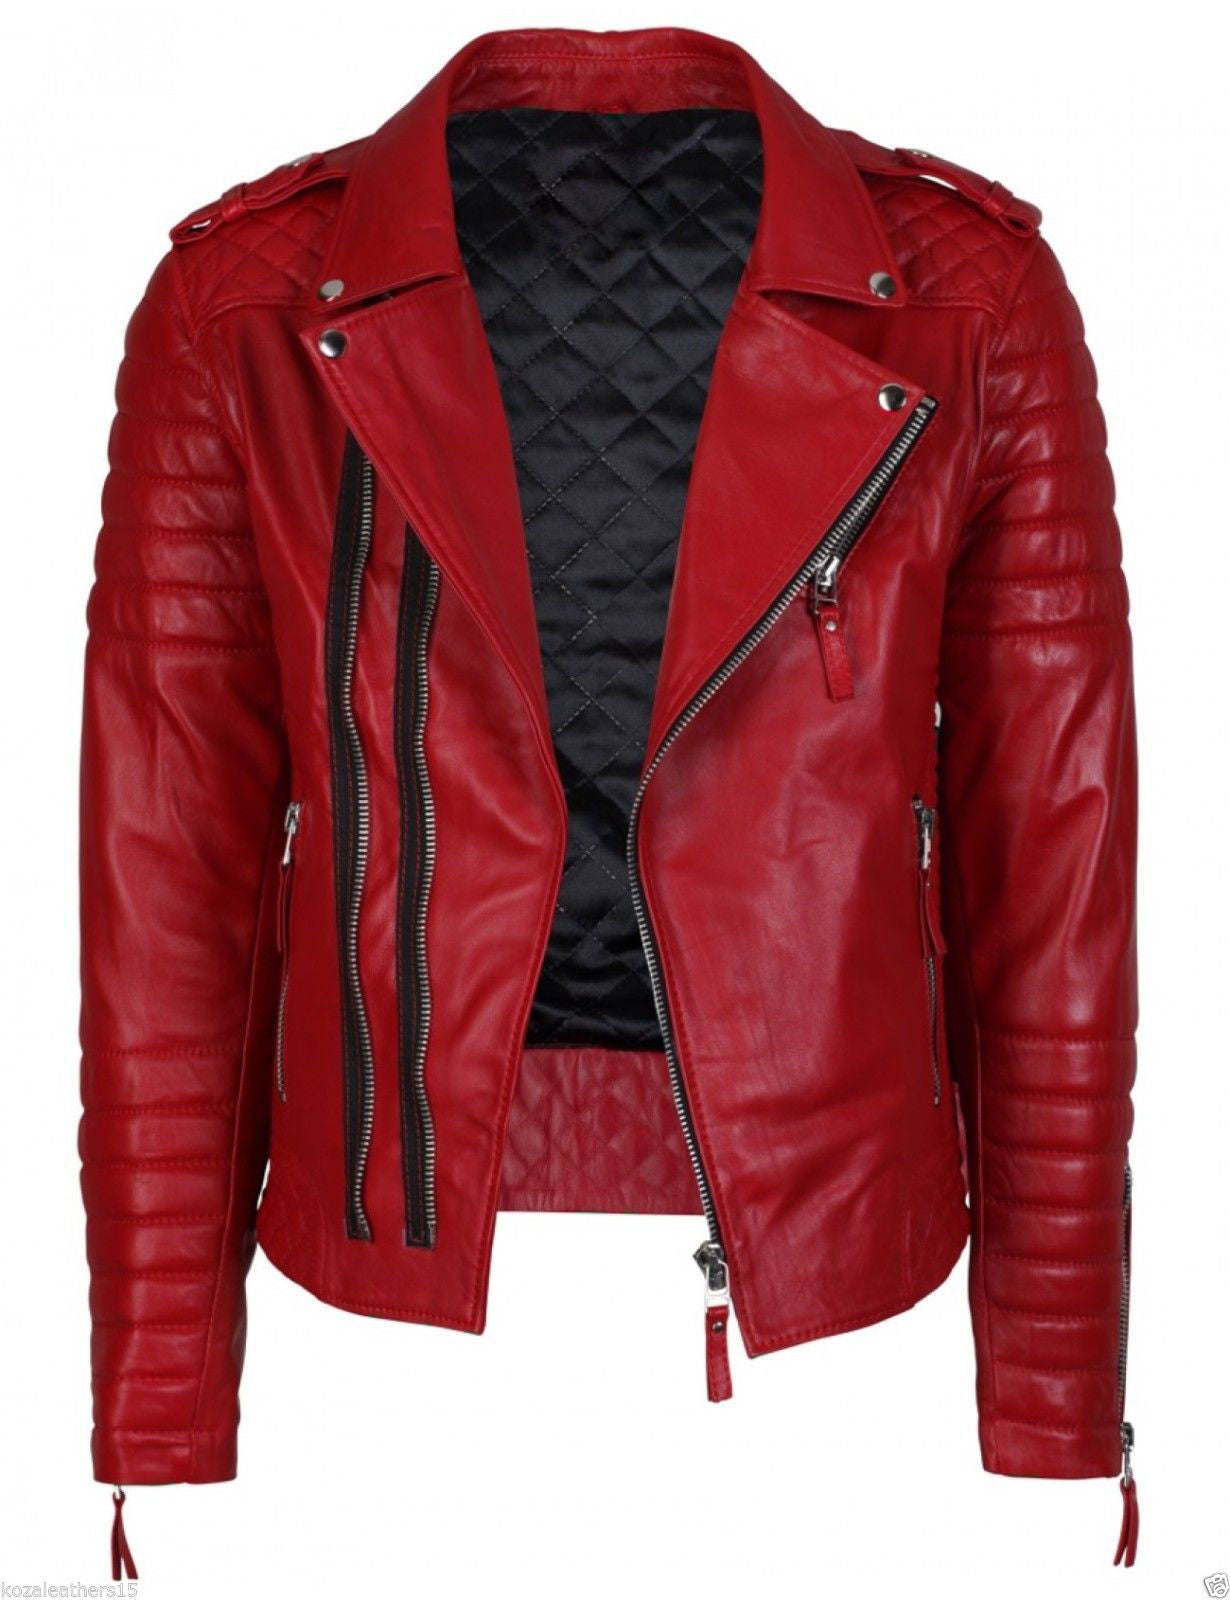 Red Quilted Leather Biker Jacket The Film Jackets